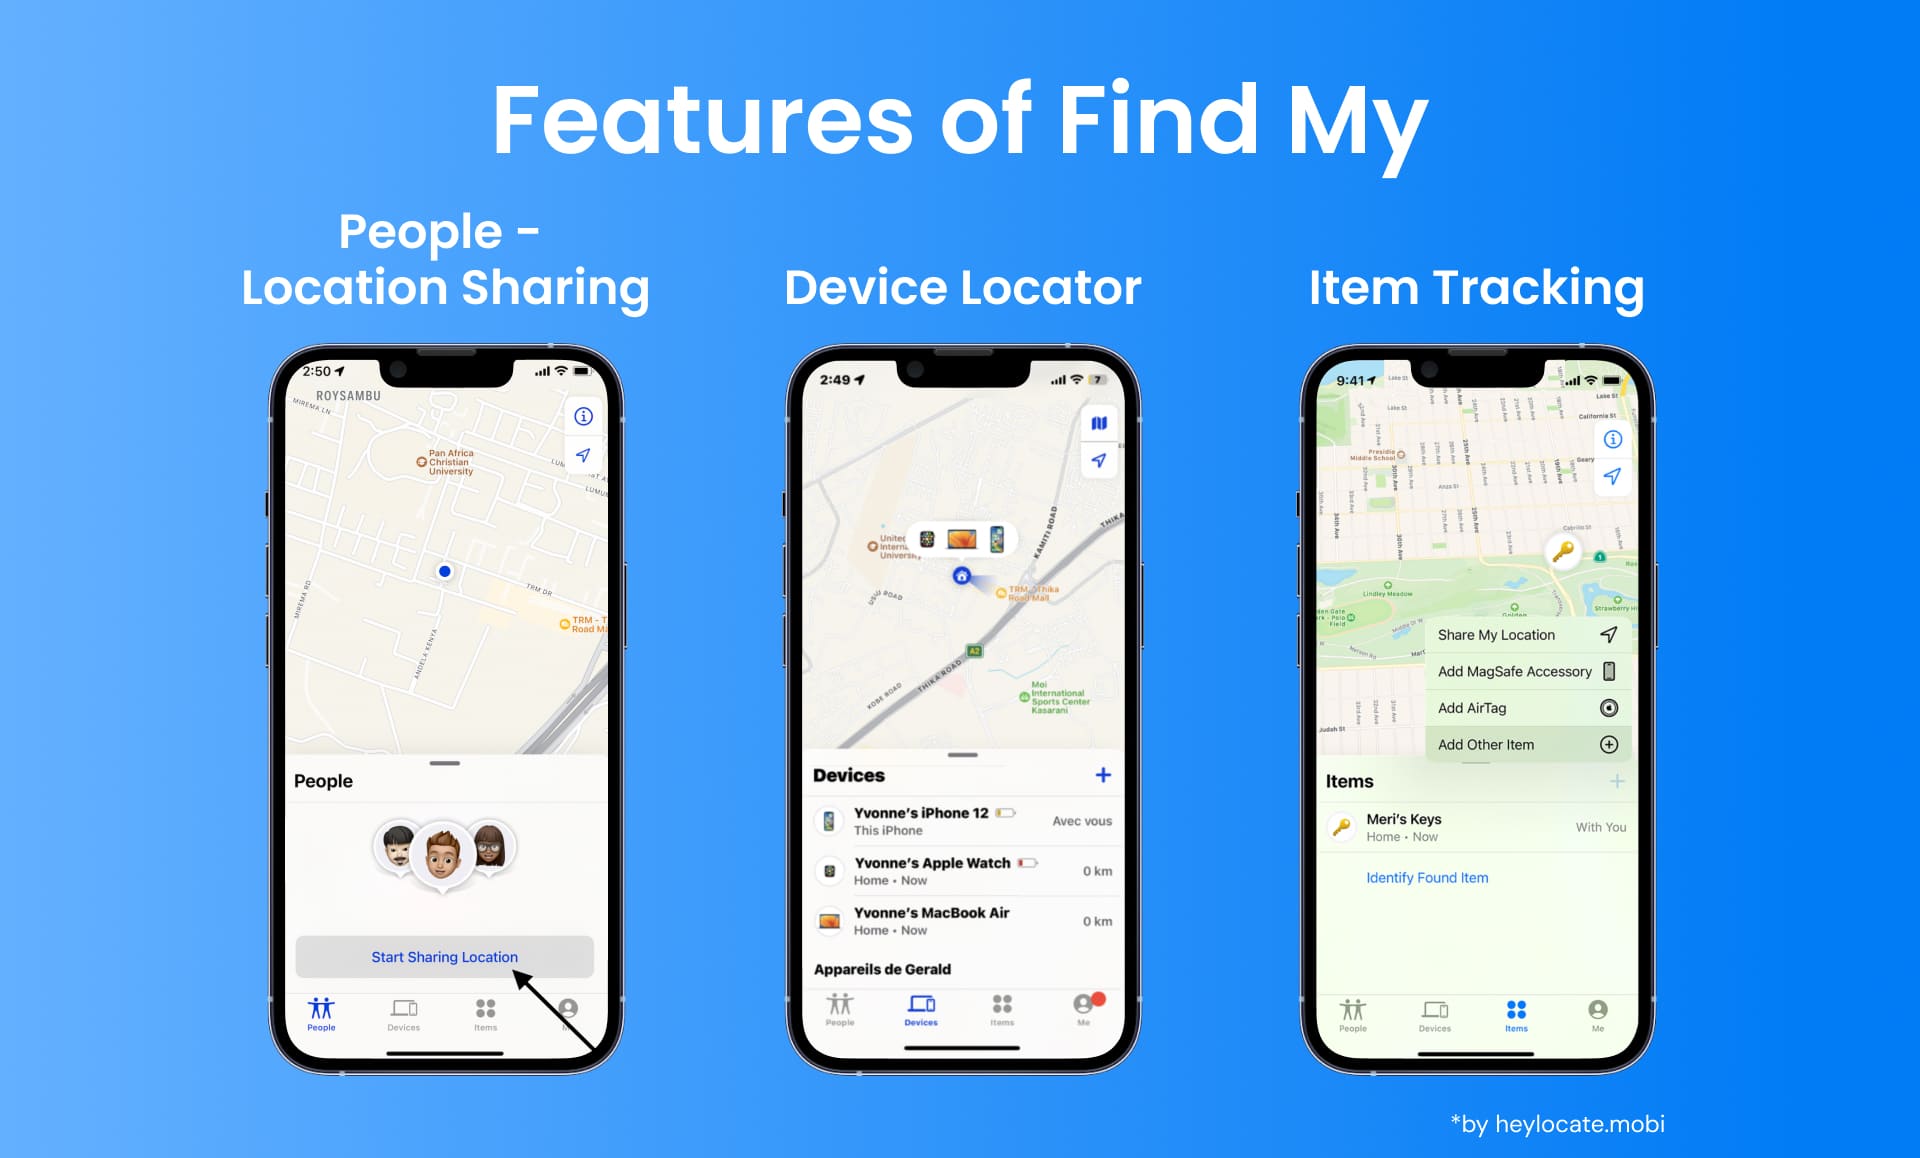 Screenshots showcasing the Find My app's features for location sharing with people, device locator for Apple products, and item tracking for personal belongings like keys with AirTags